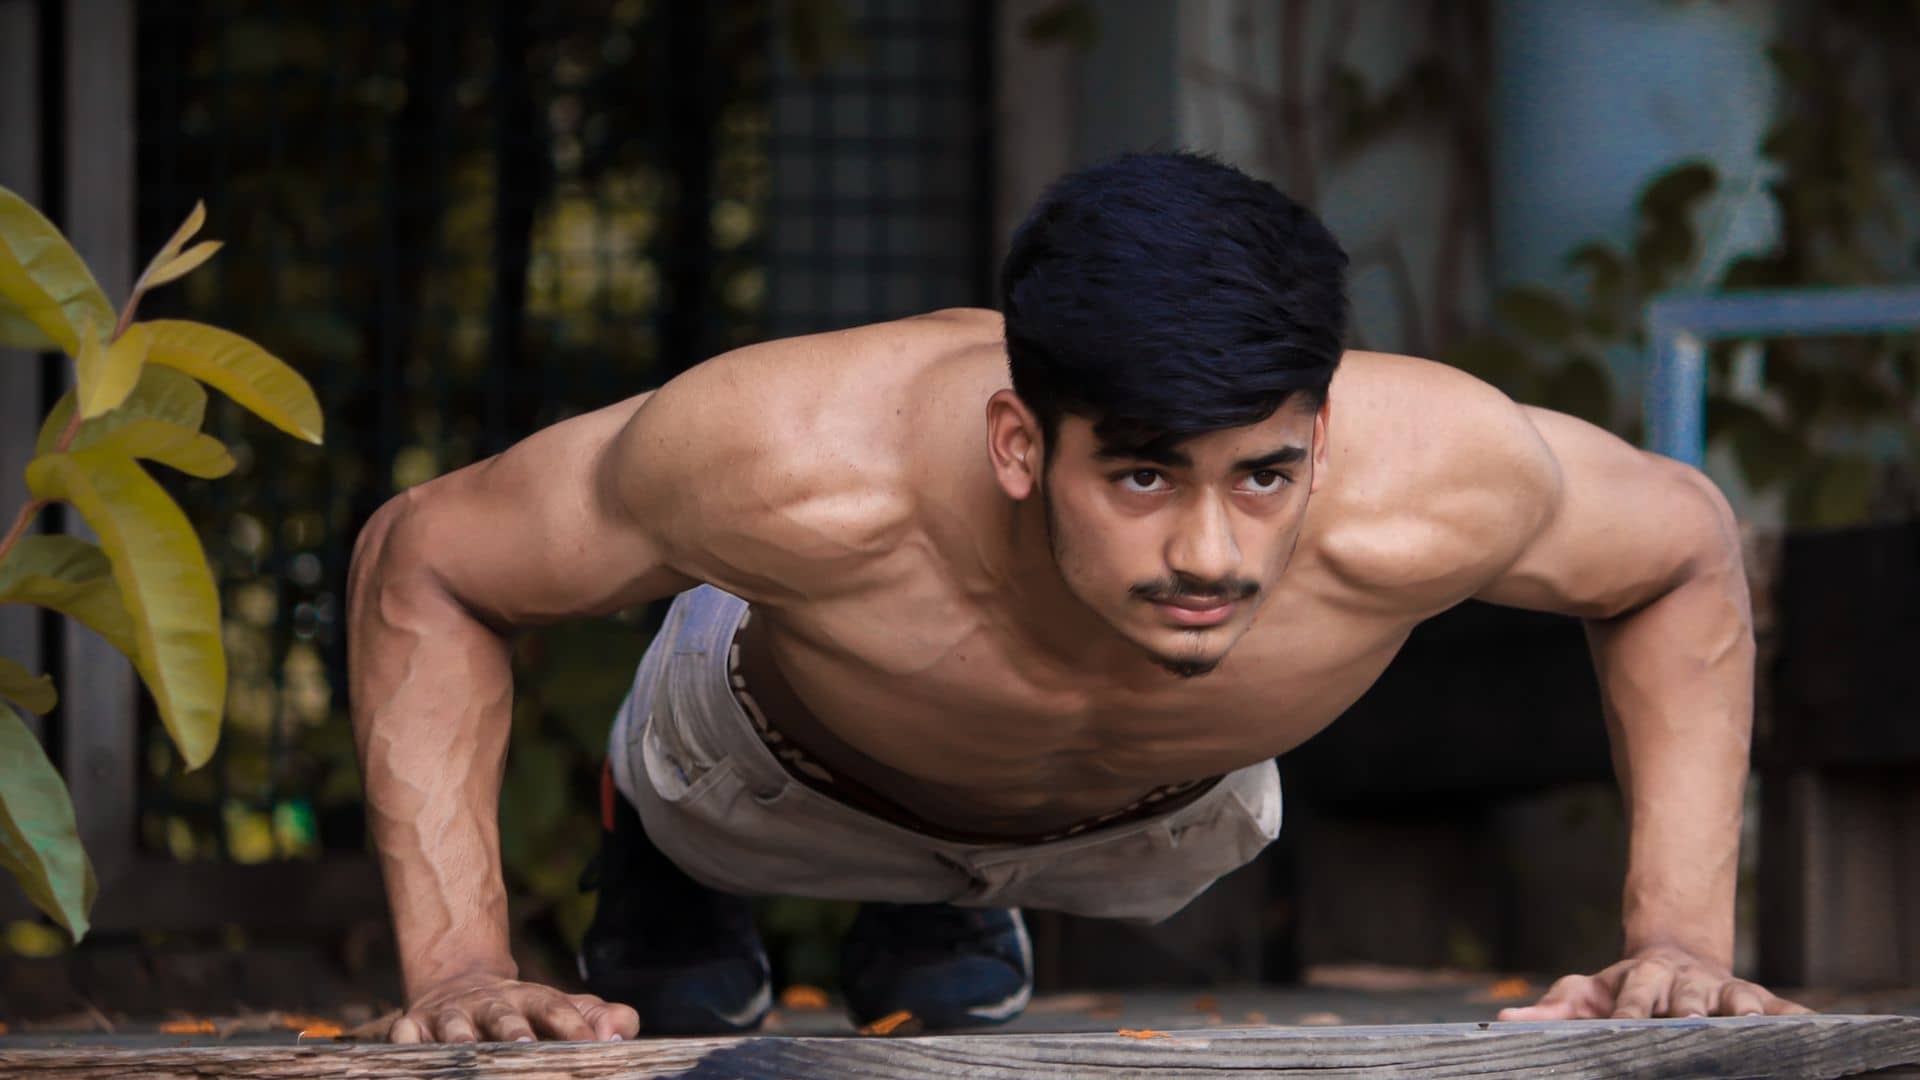 Do Push-Ups Make Your Voice Deeper